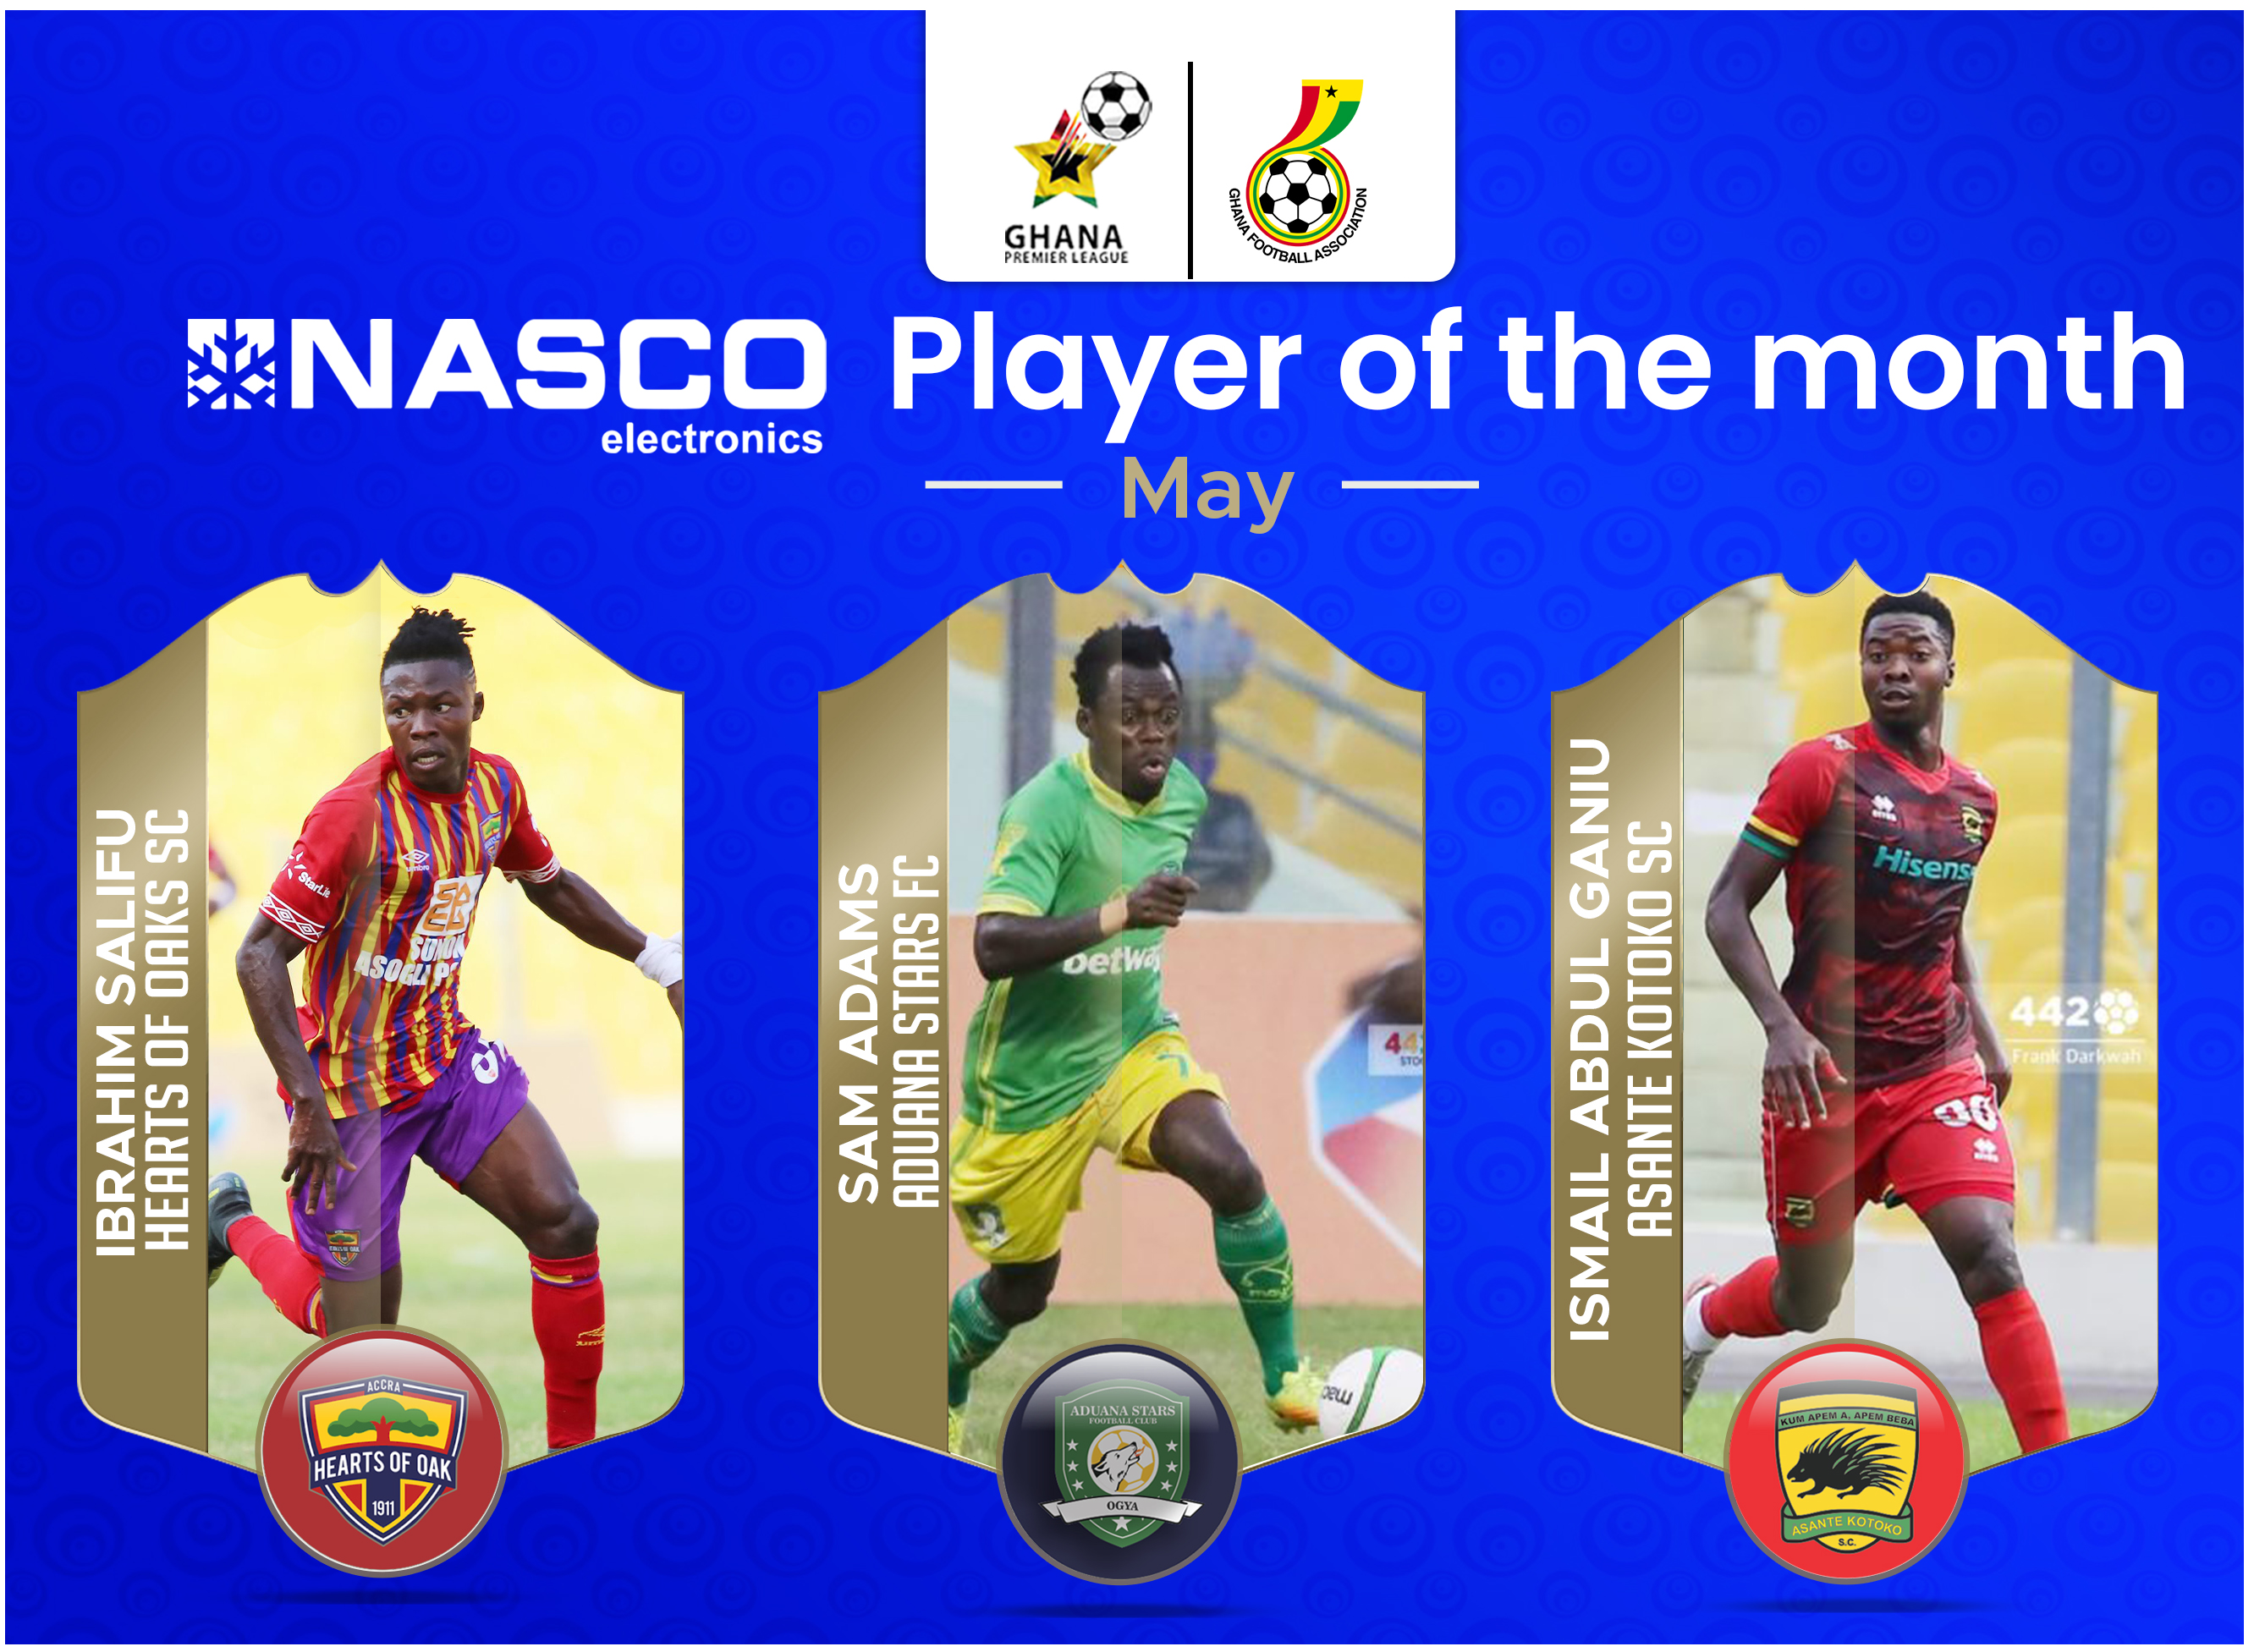 Nominees for NASCO Player of the Month - May